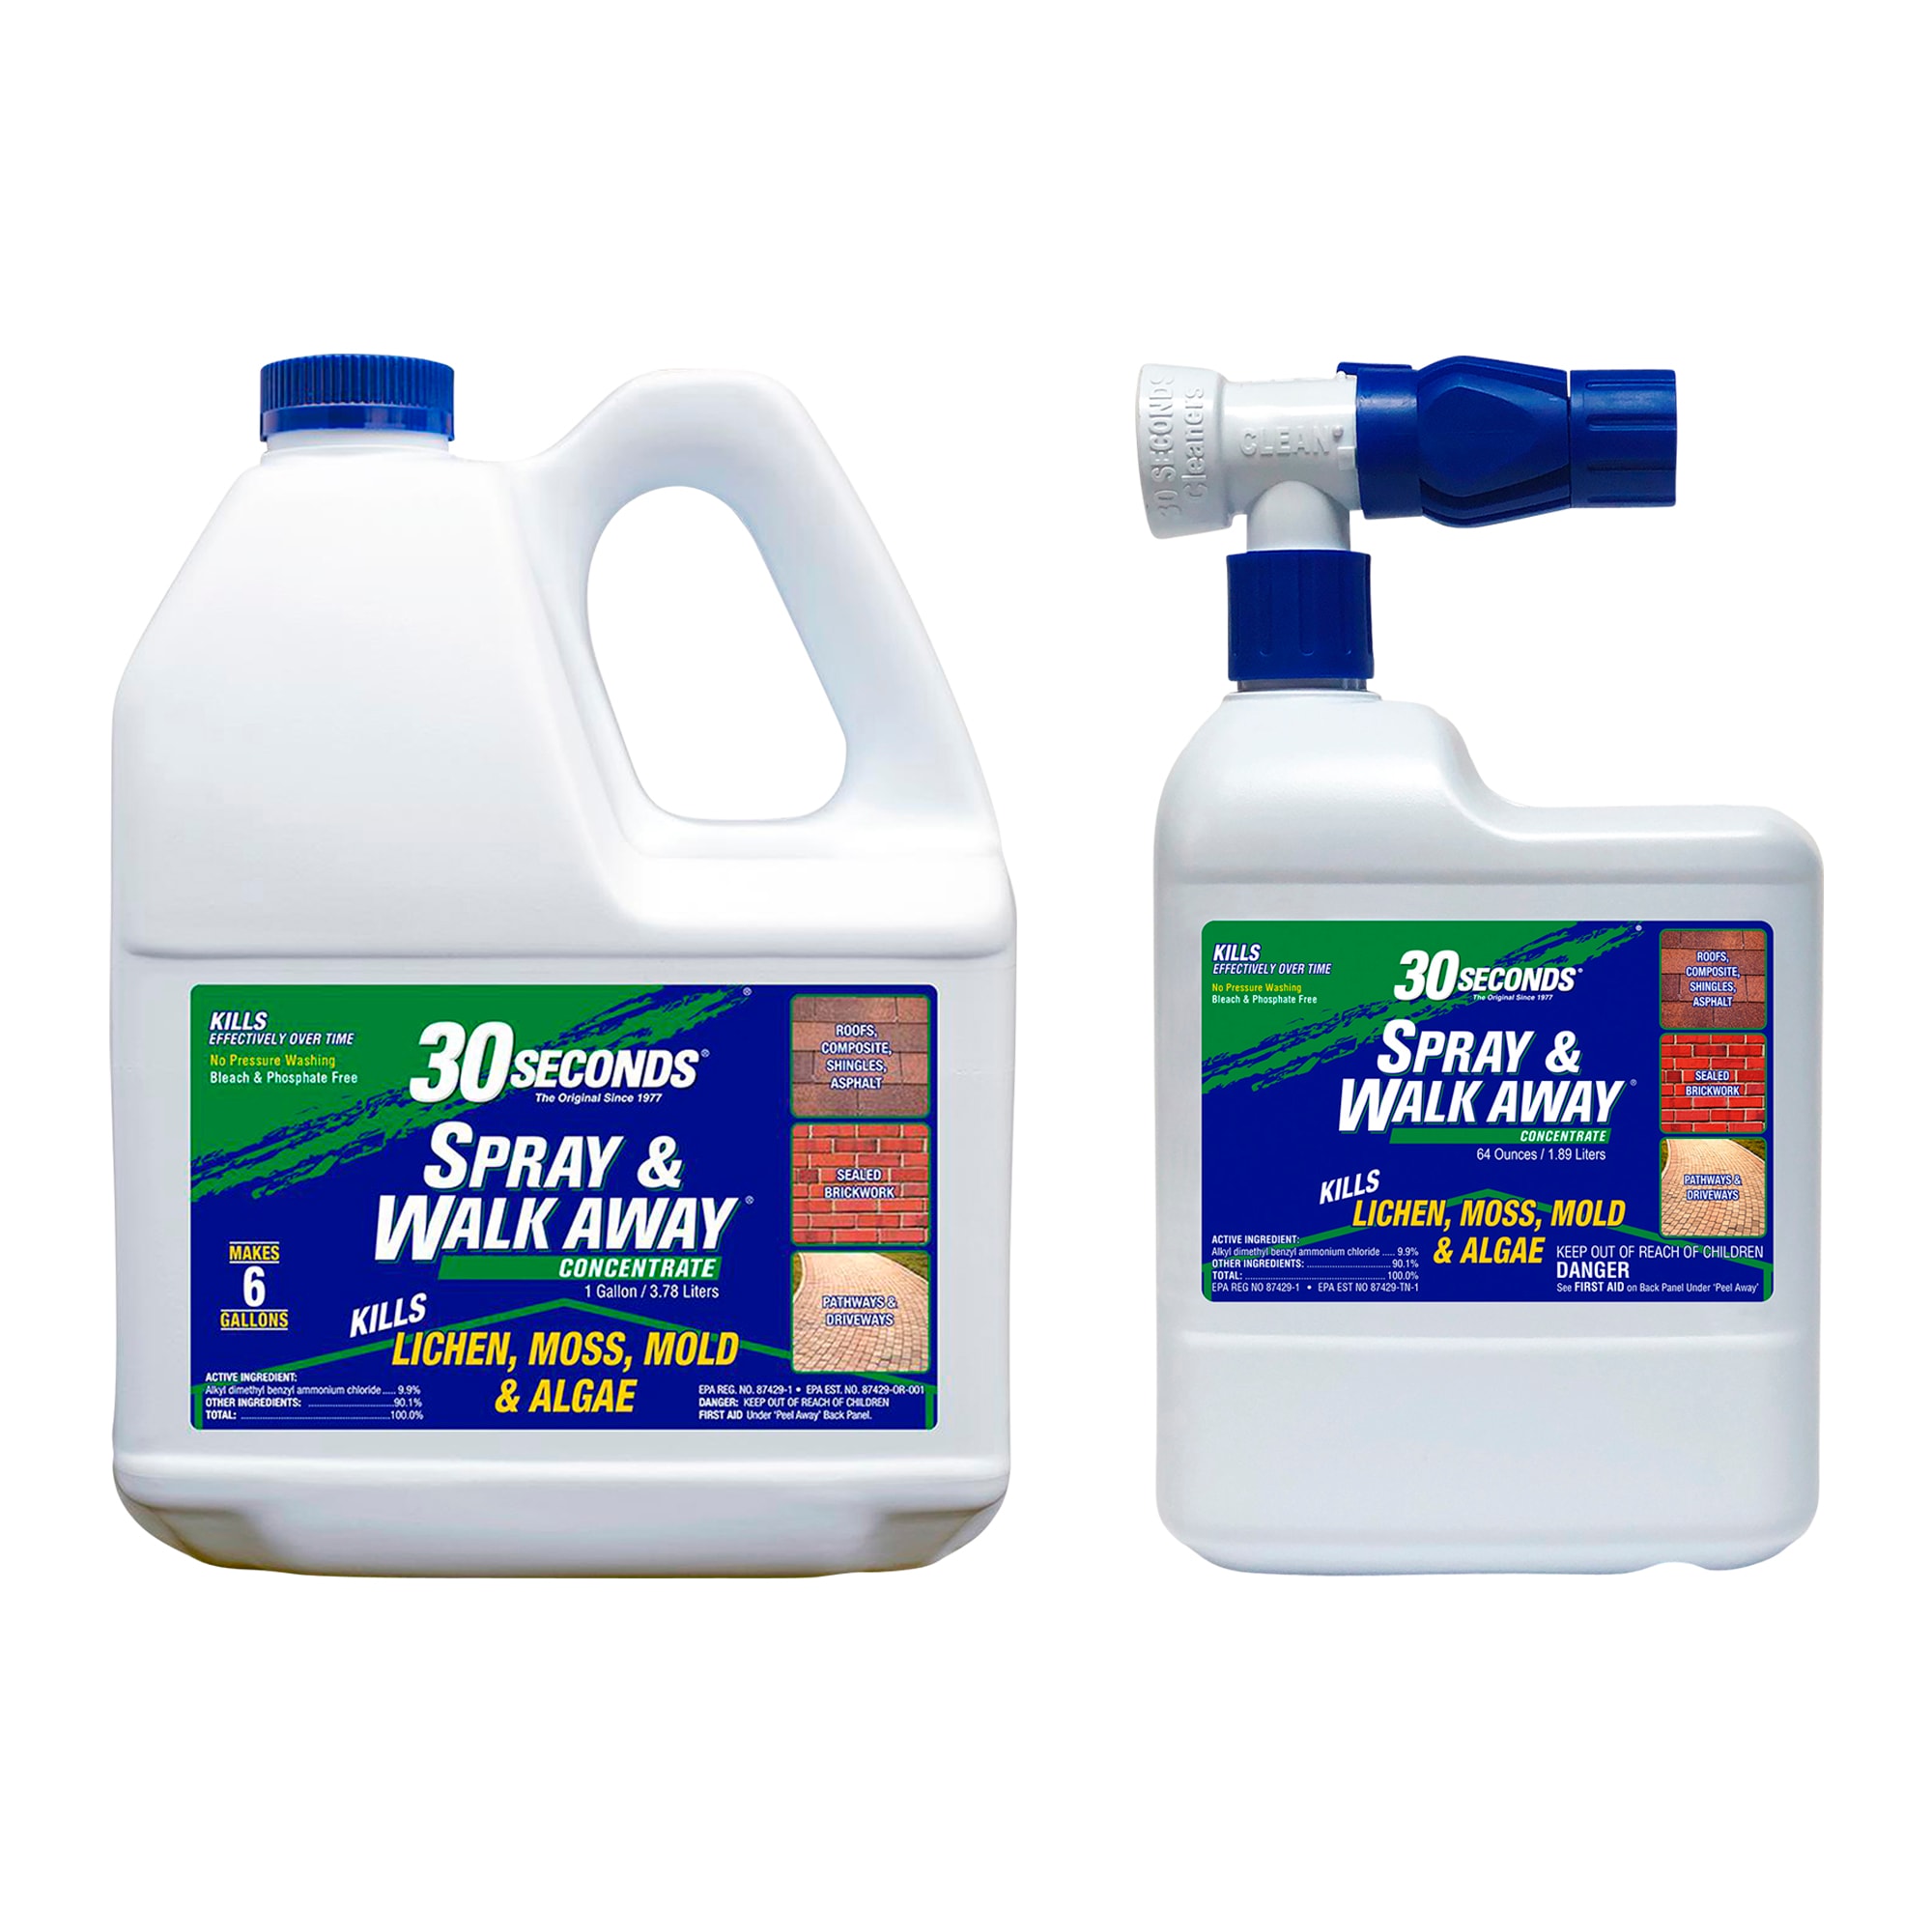 Shop 30 SECONDS 30 Seconds Outdoor Cleaner Concentrate and Ready To Spray  at